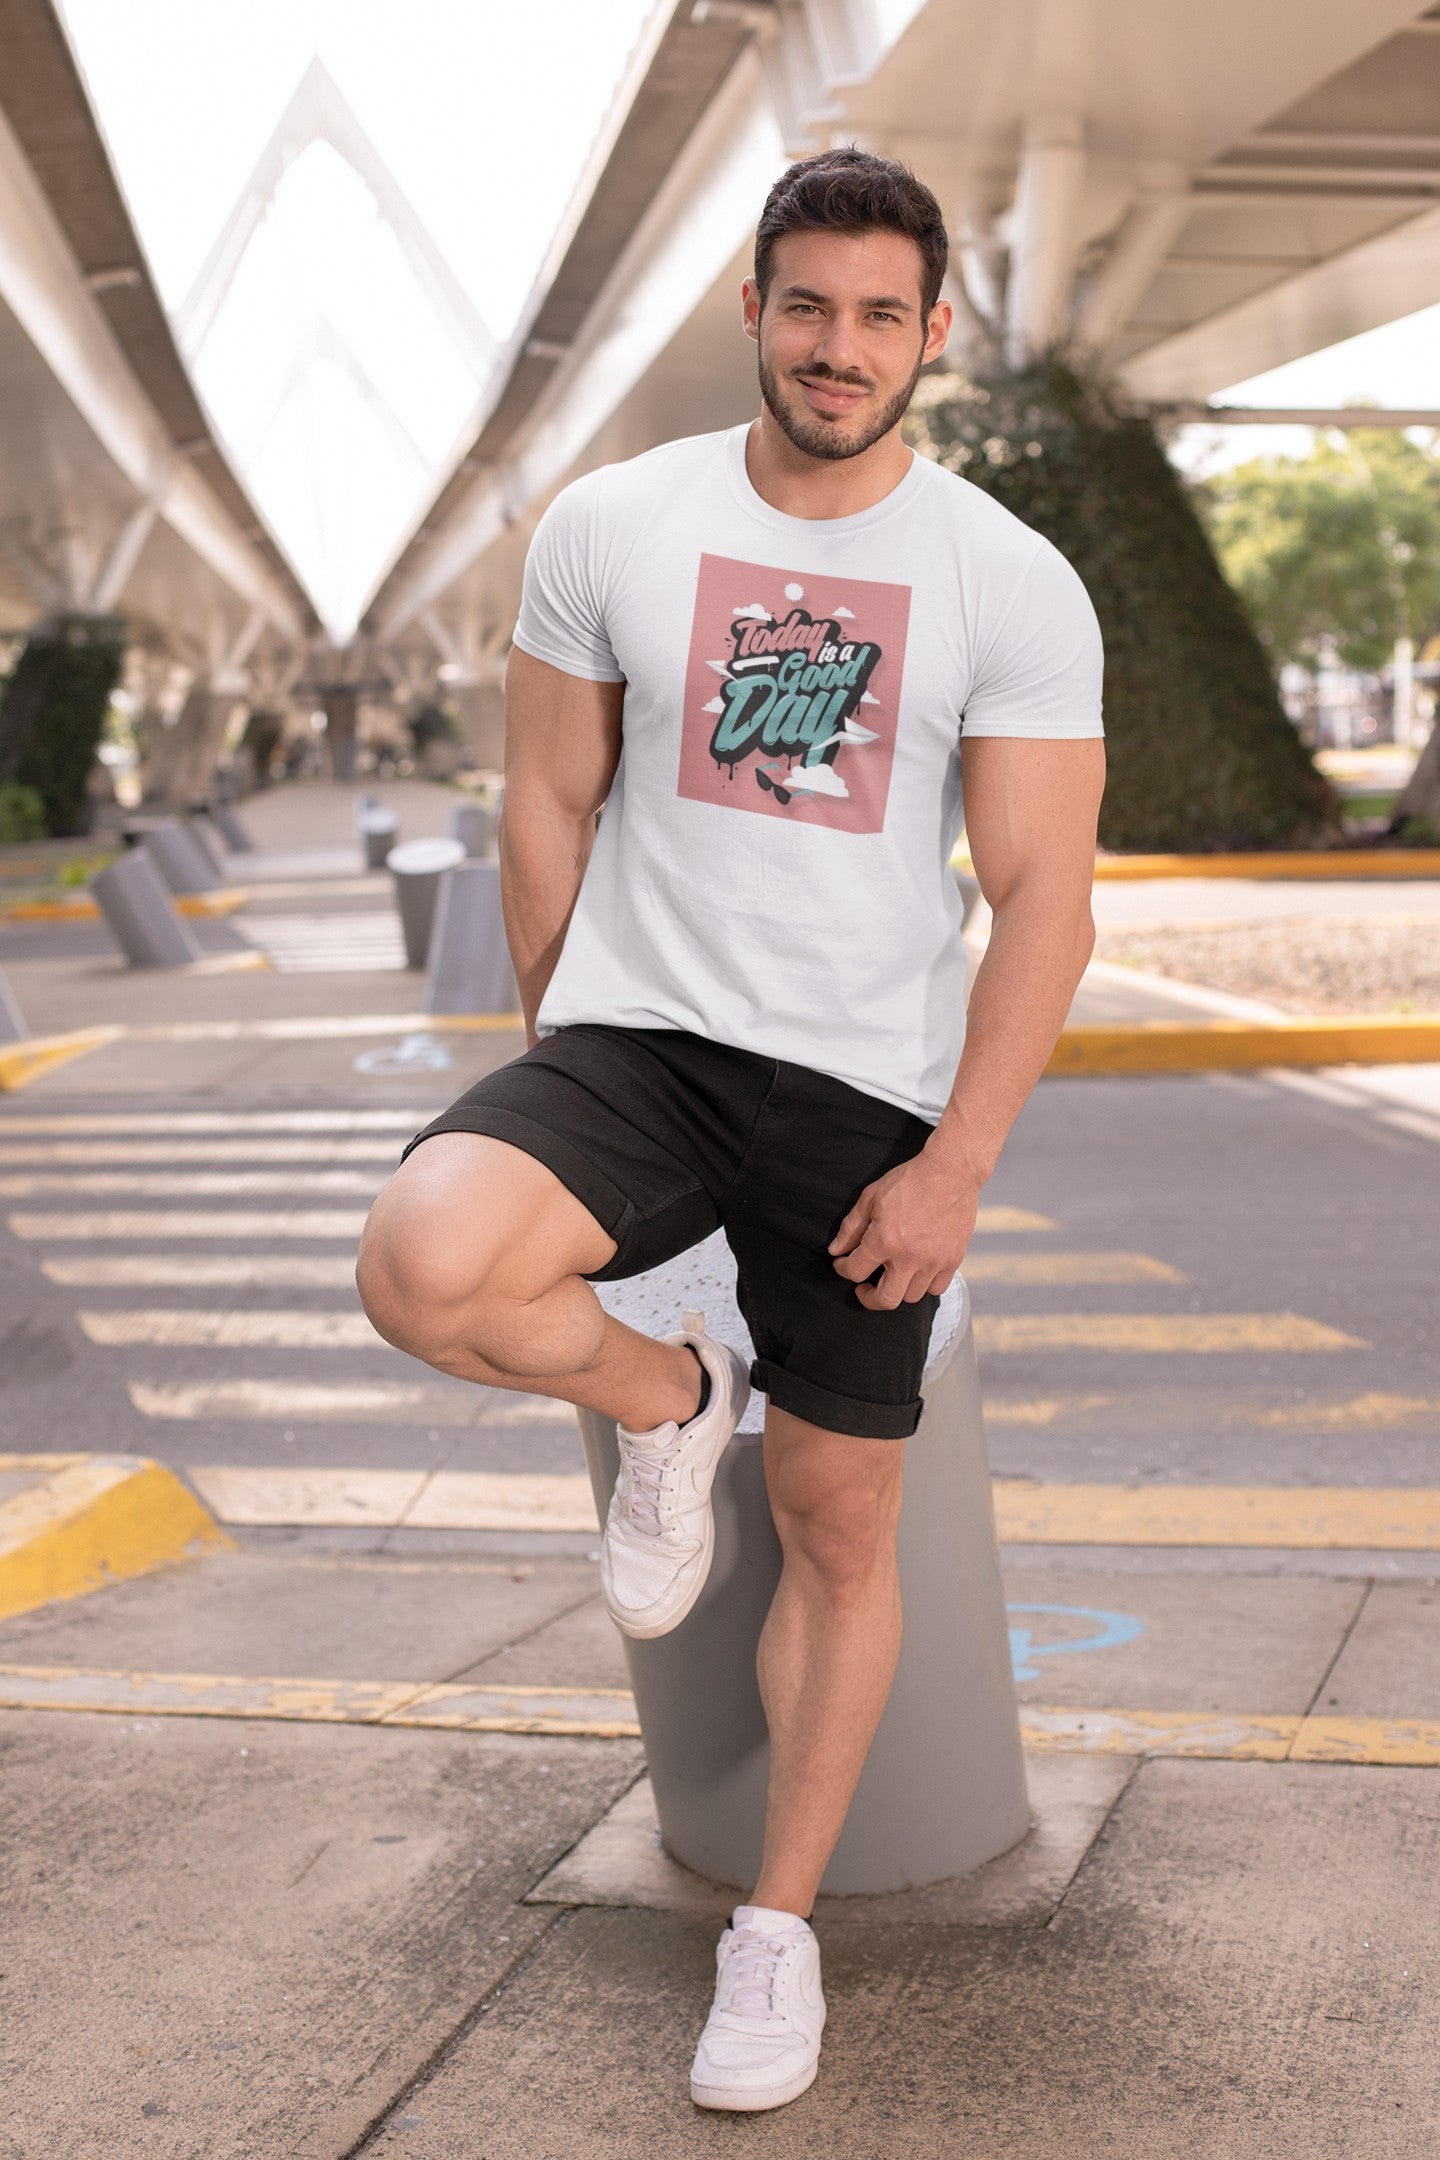 Gym T Shirt - Today Is A Good Day with premium cotton Lycra. The Sports T Shirt by Strong Soul